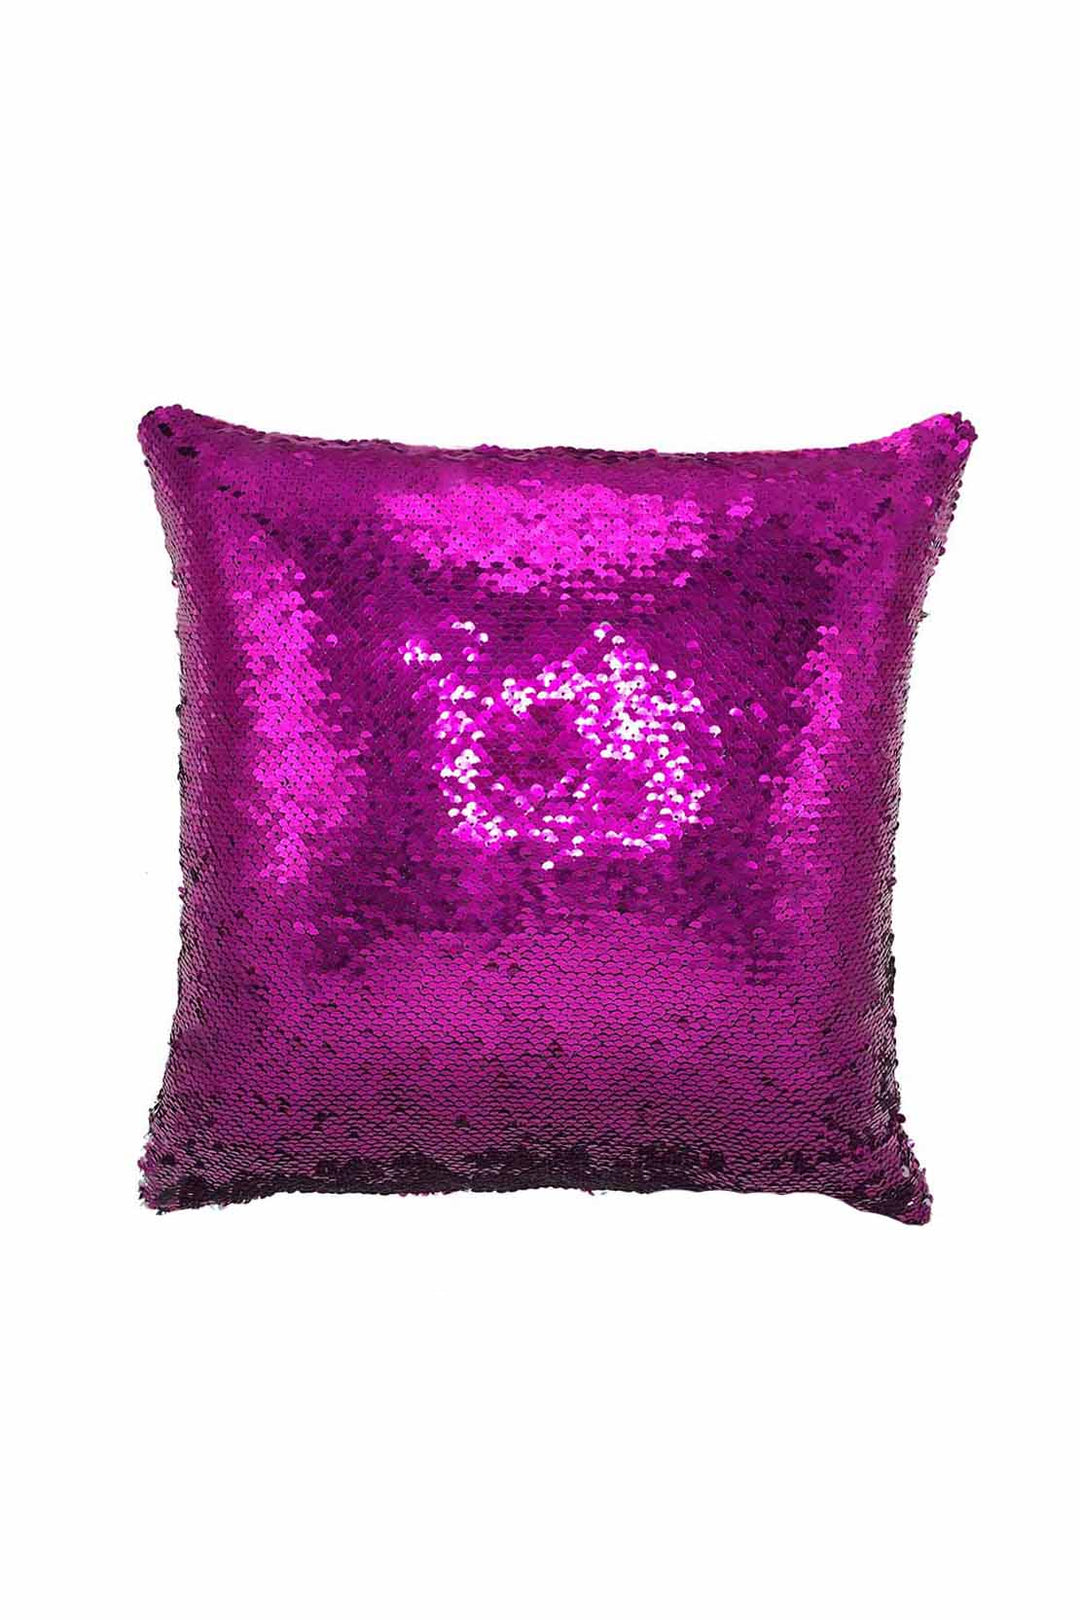 Glitter Cushion Cover Without Filling Pink and Silver - V Surfaces